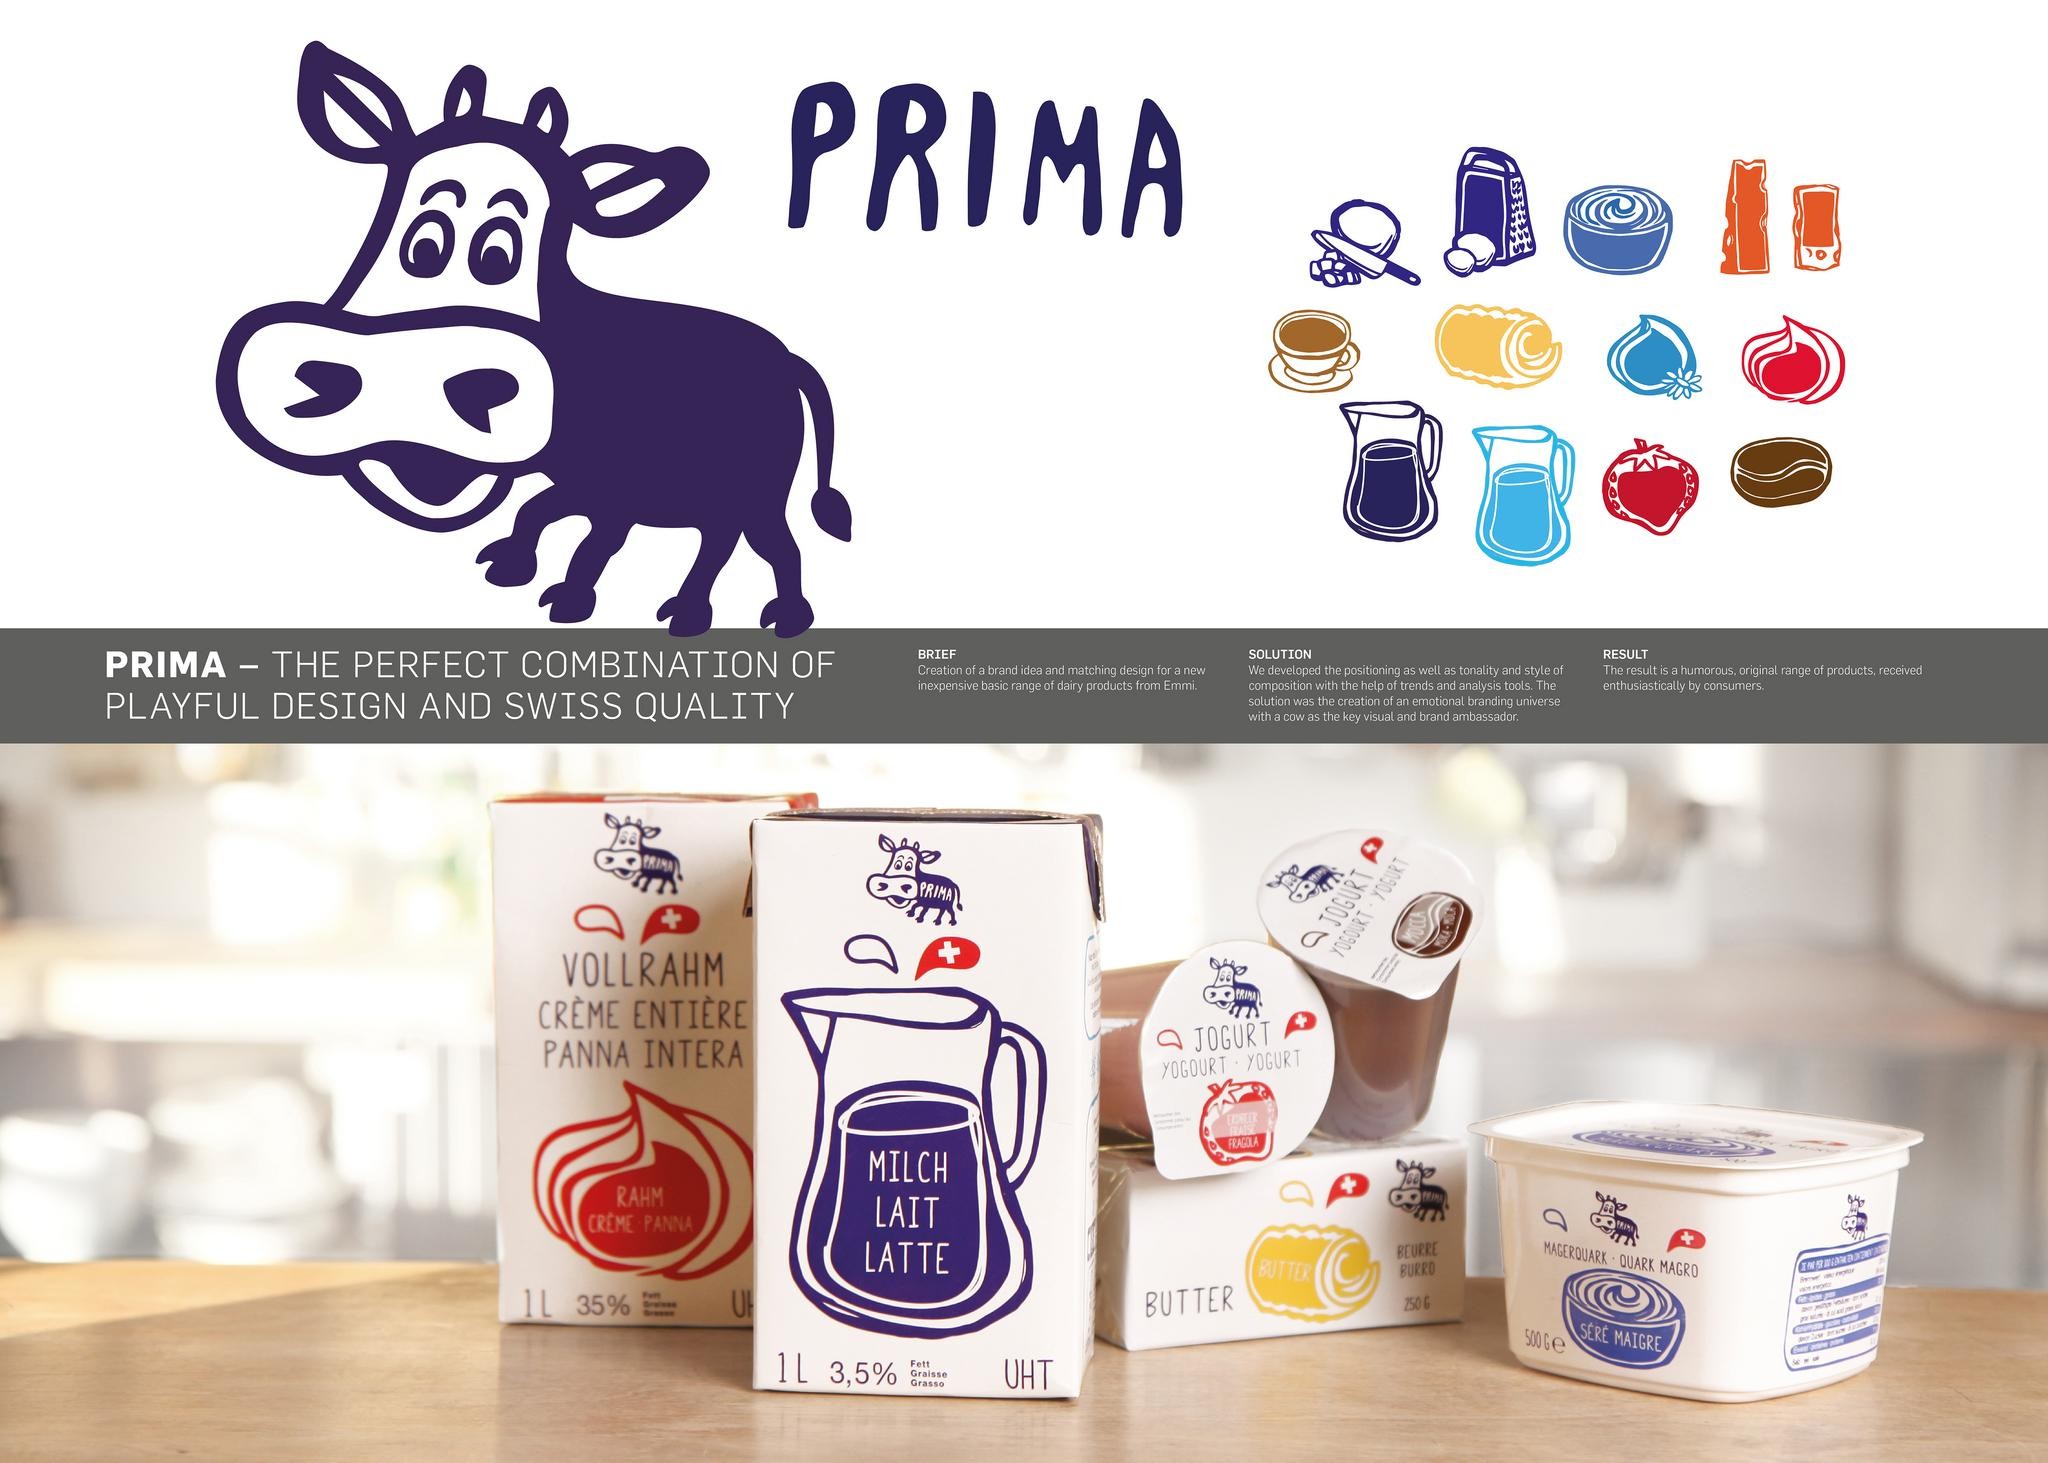 PRIMA – THE PERFECT COMBINATION OF PLAYFUL DESIGN AND SWISS QUALITY